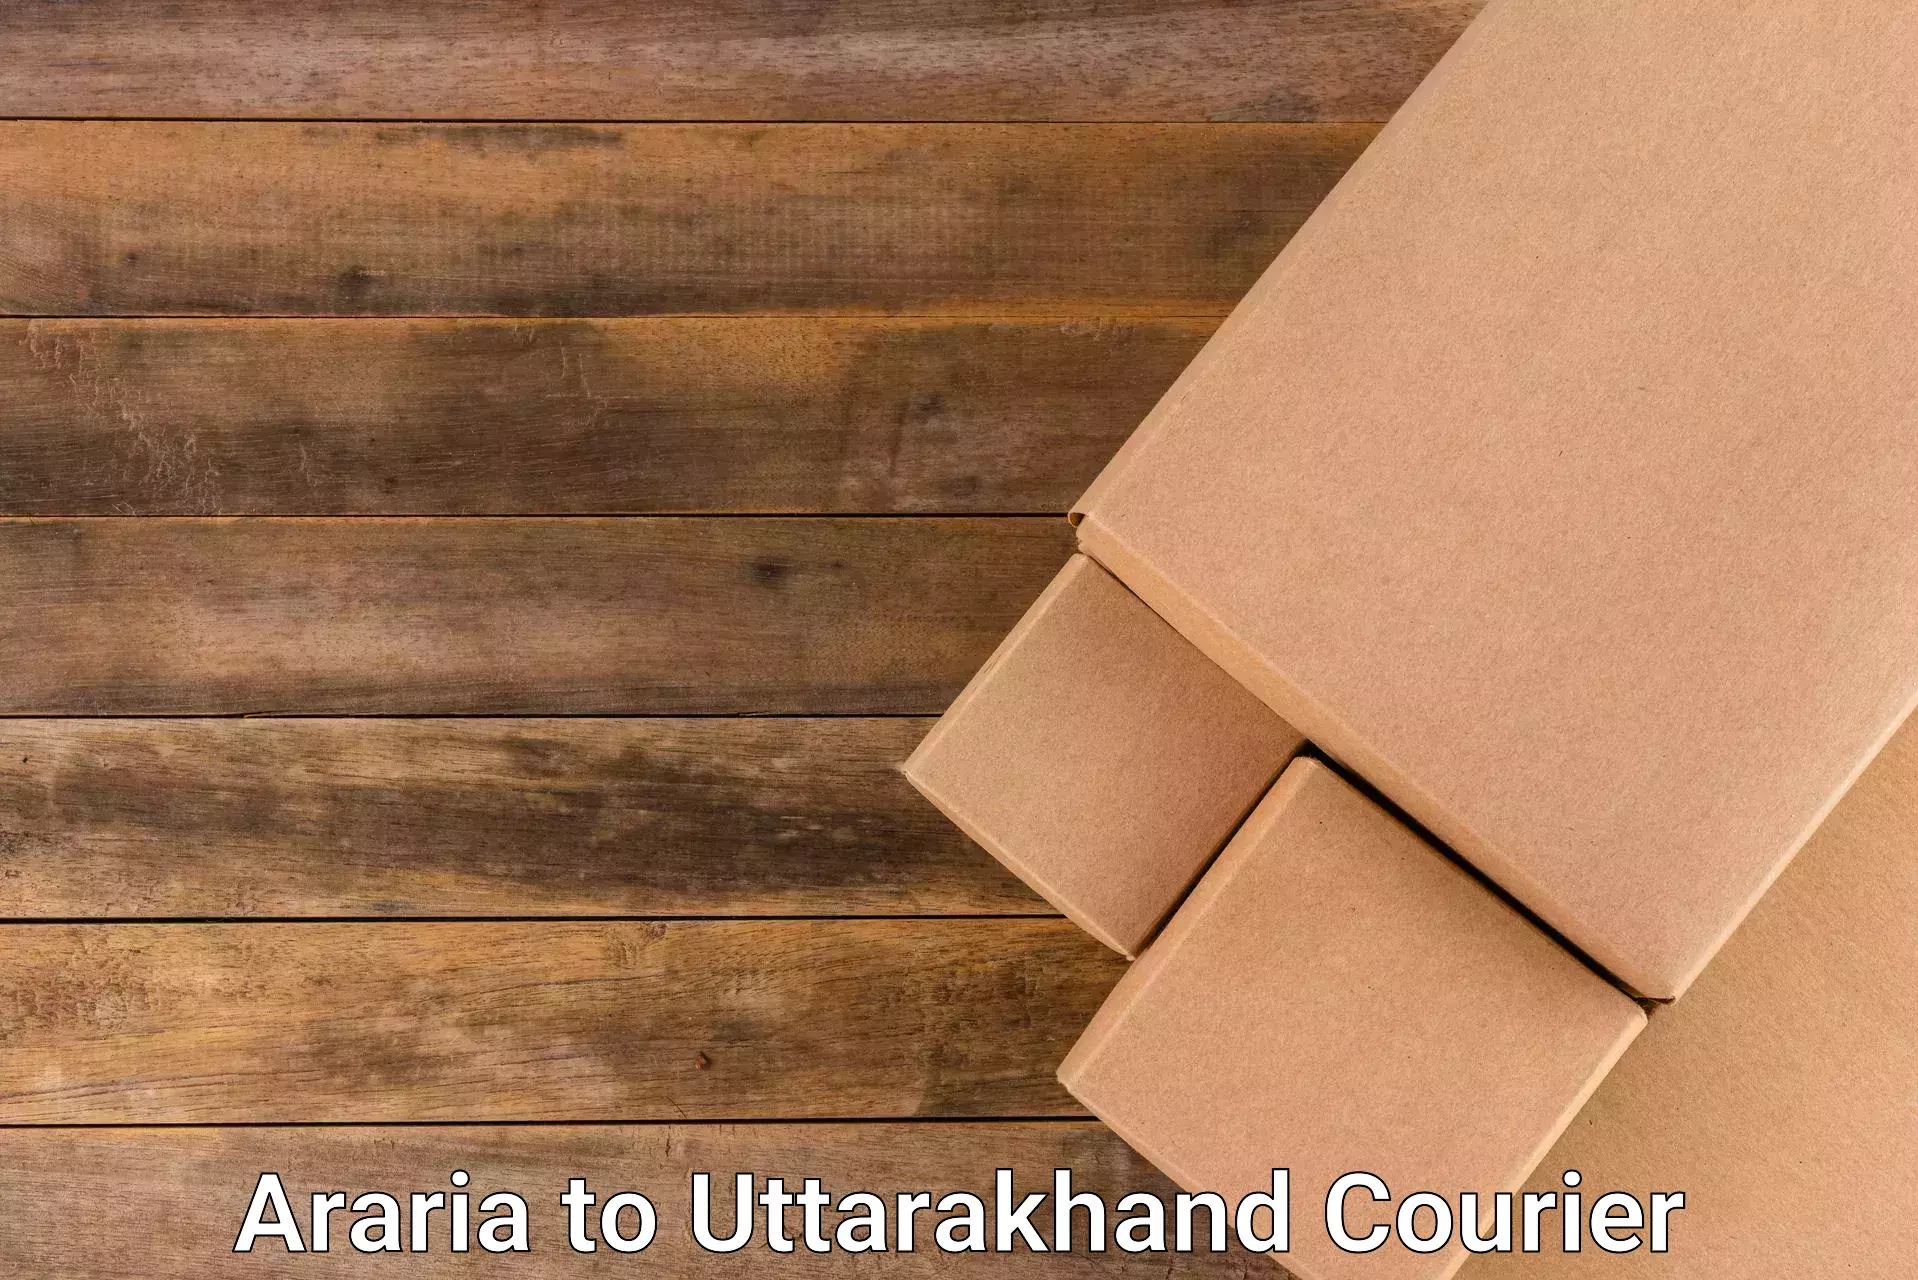 Reliable delivery network Araria to Tehri